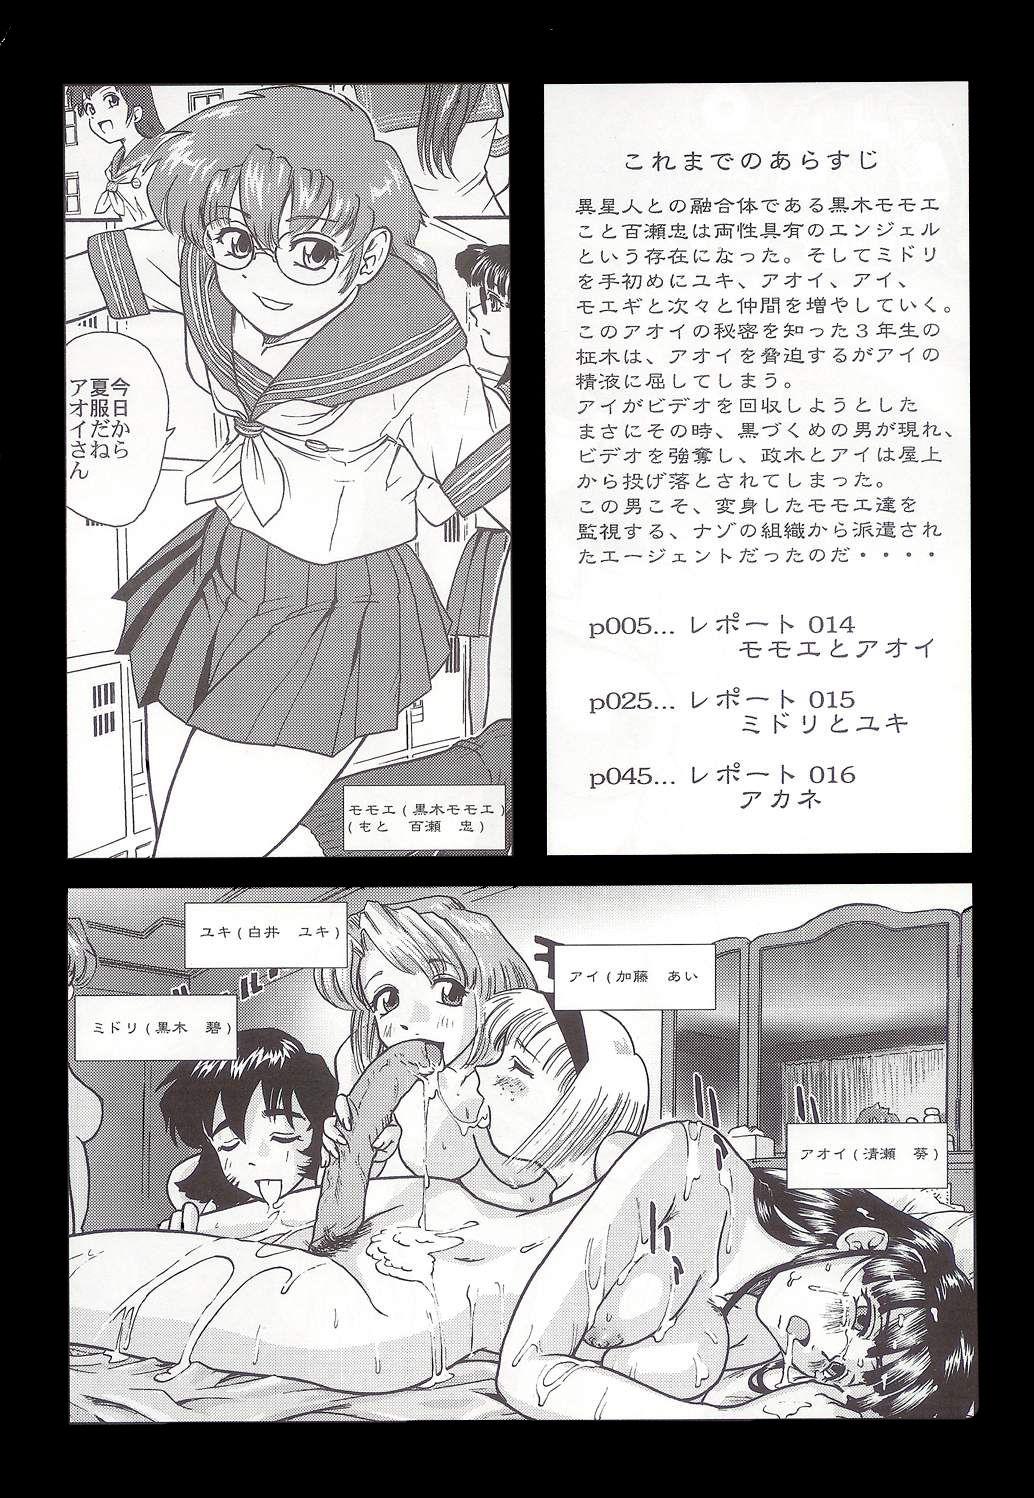 Korea Dulce Report 5 | 达西报告 5 Uncensored - Page 4